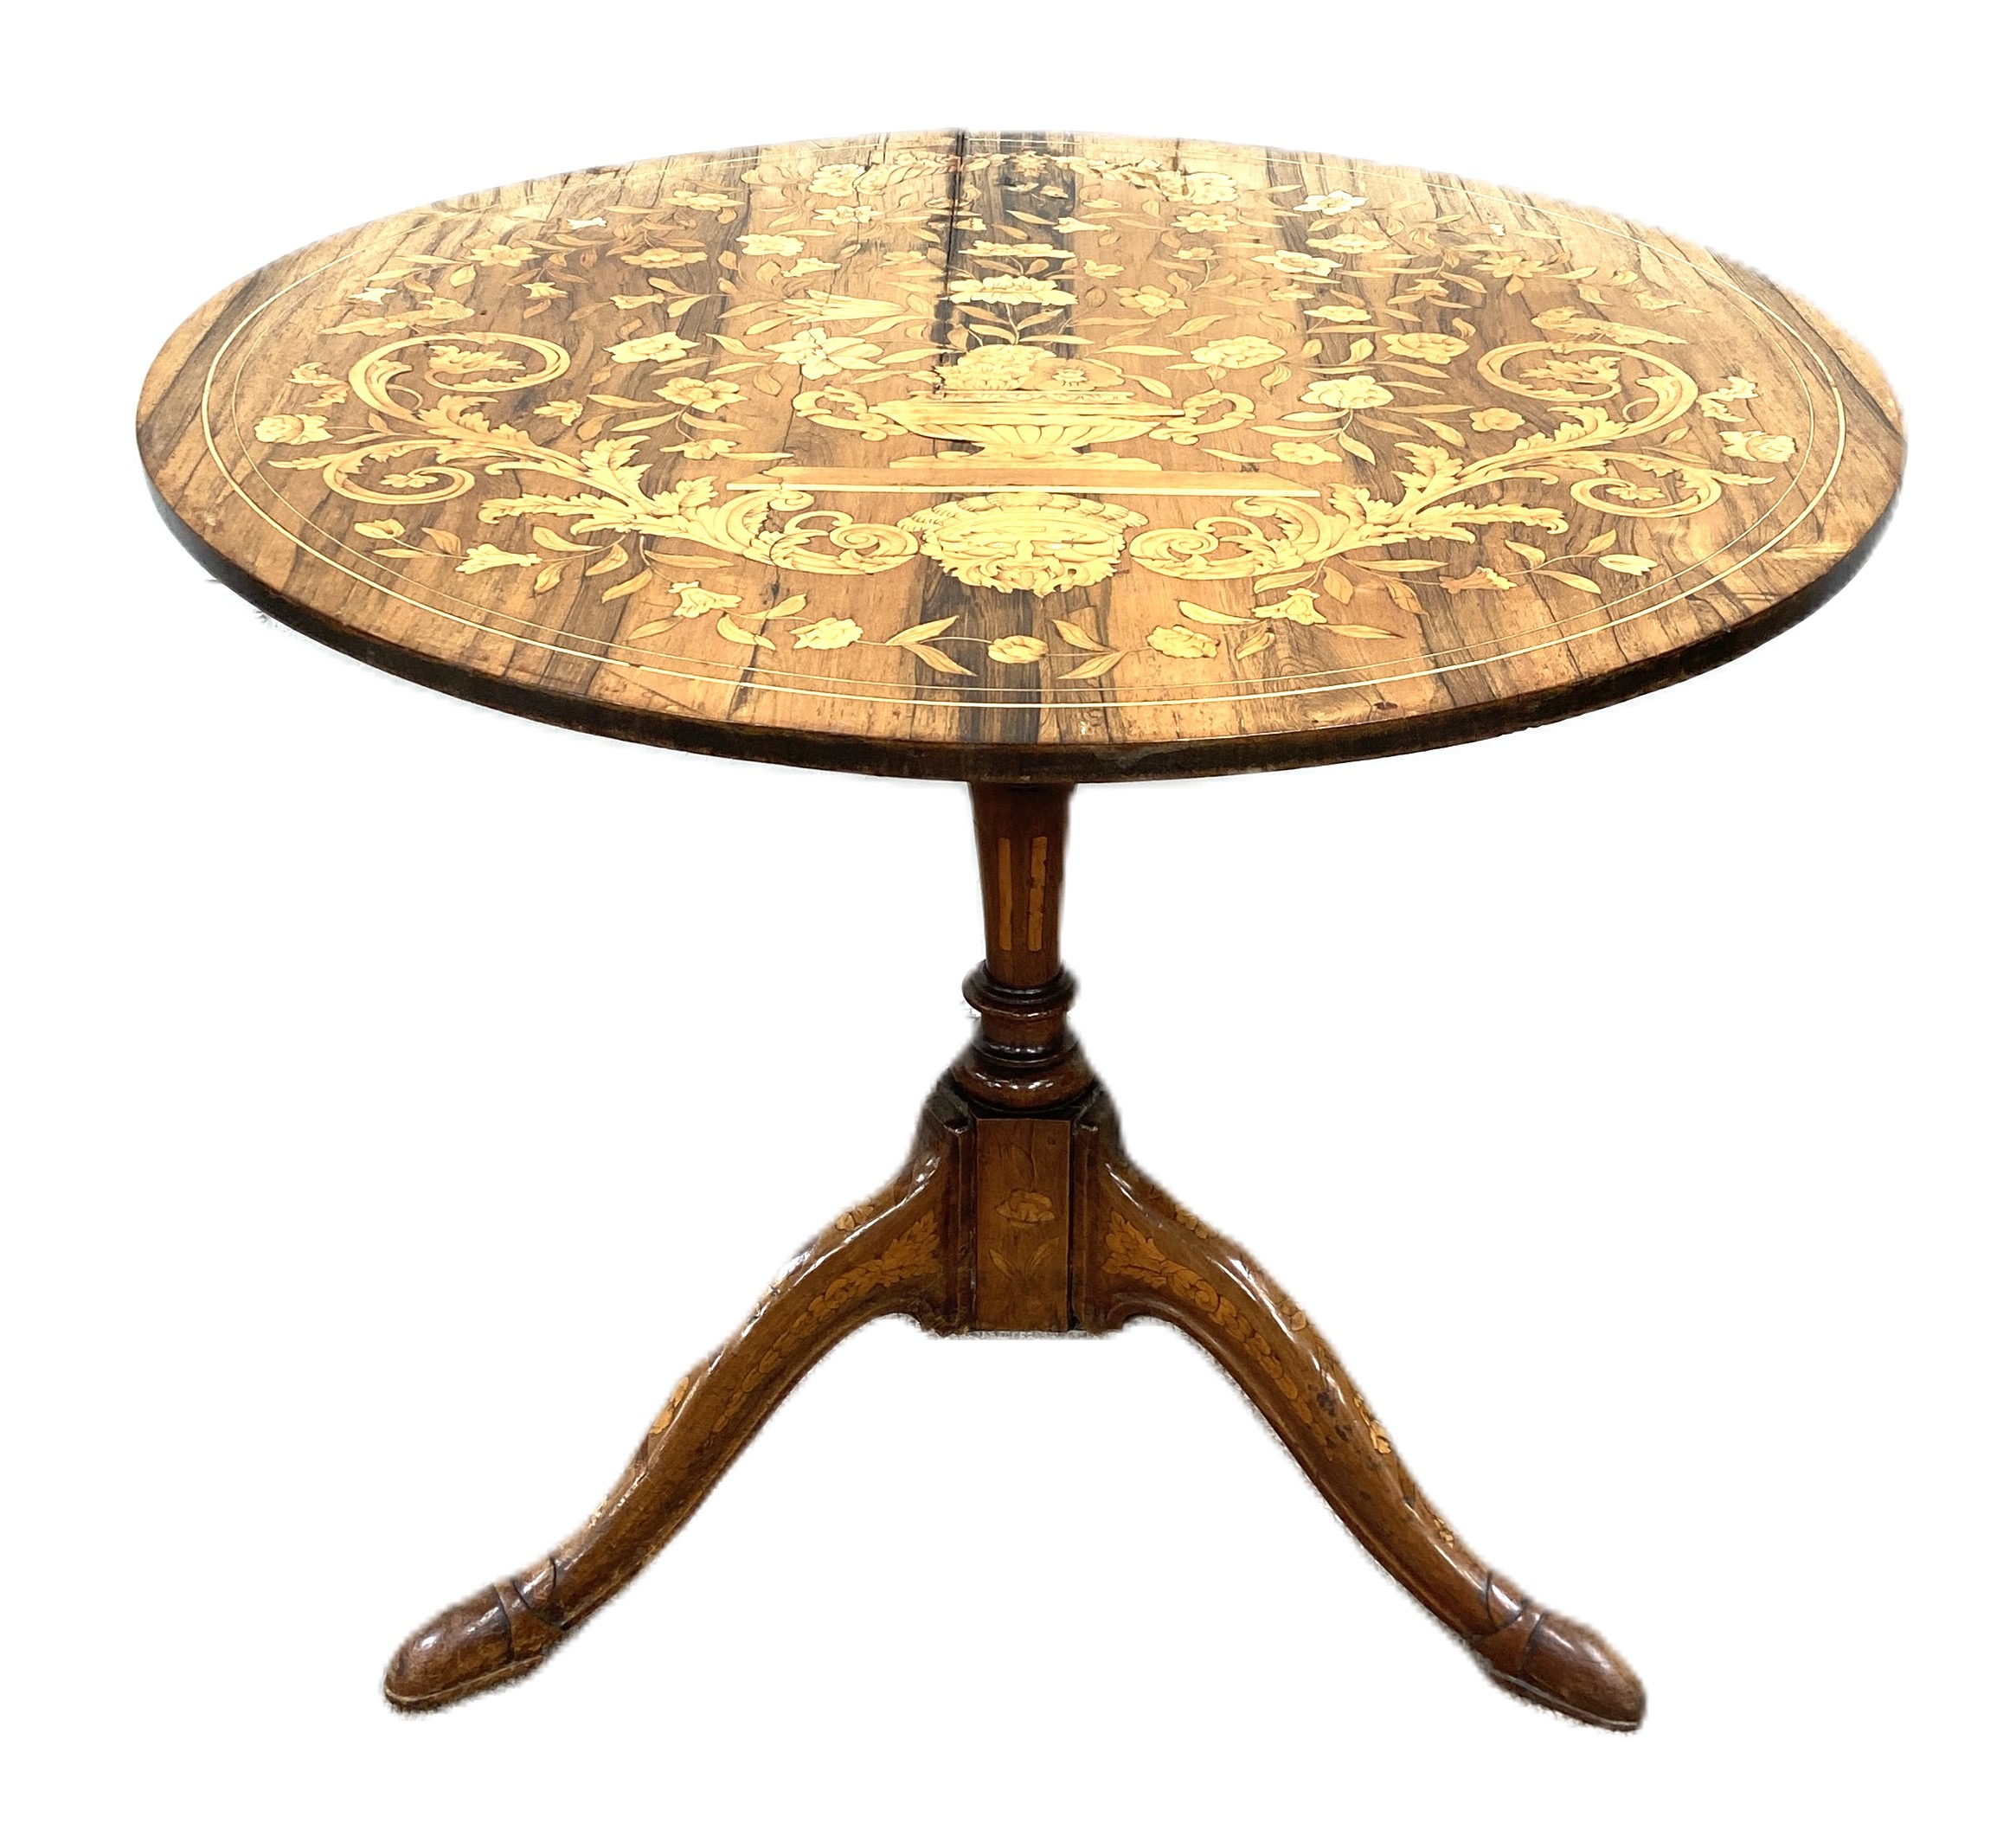 An Anglo-Dutch inlaid circular wine table, late 18th century and later, with a tilting coromandel